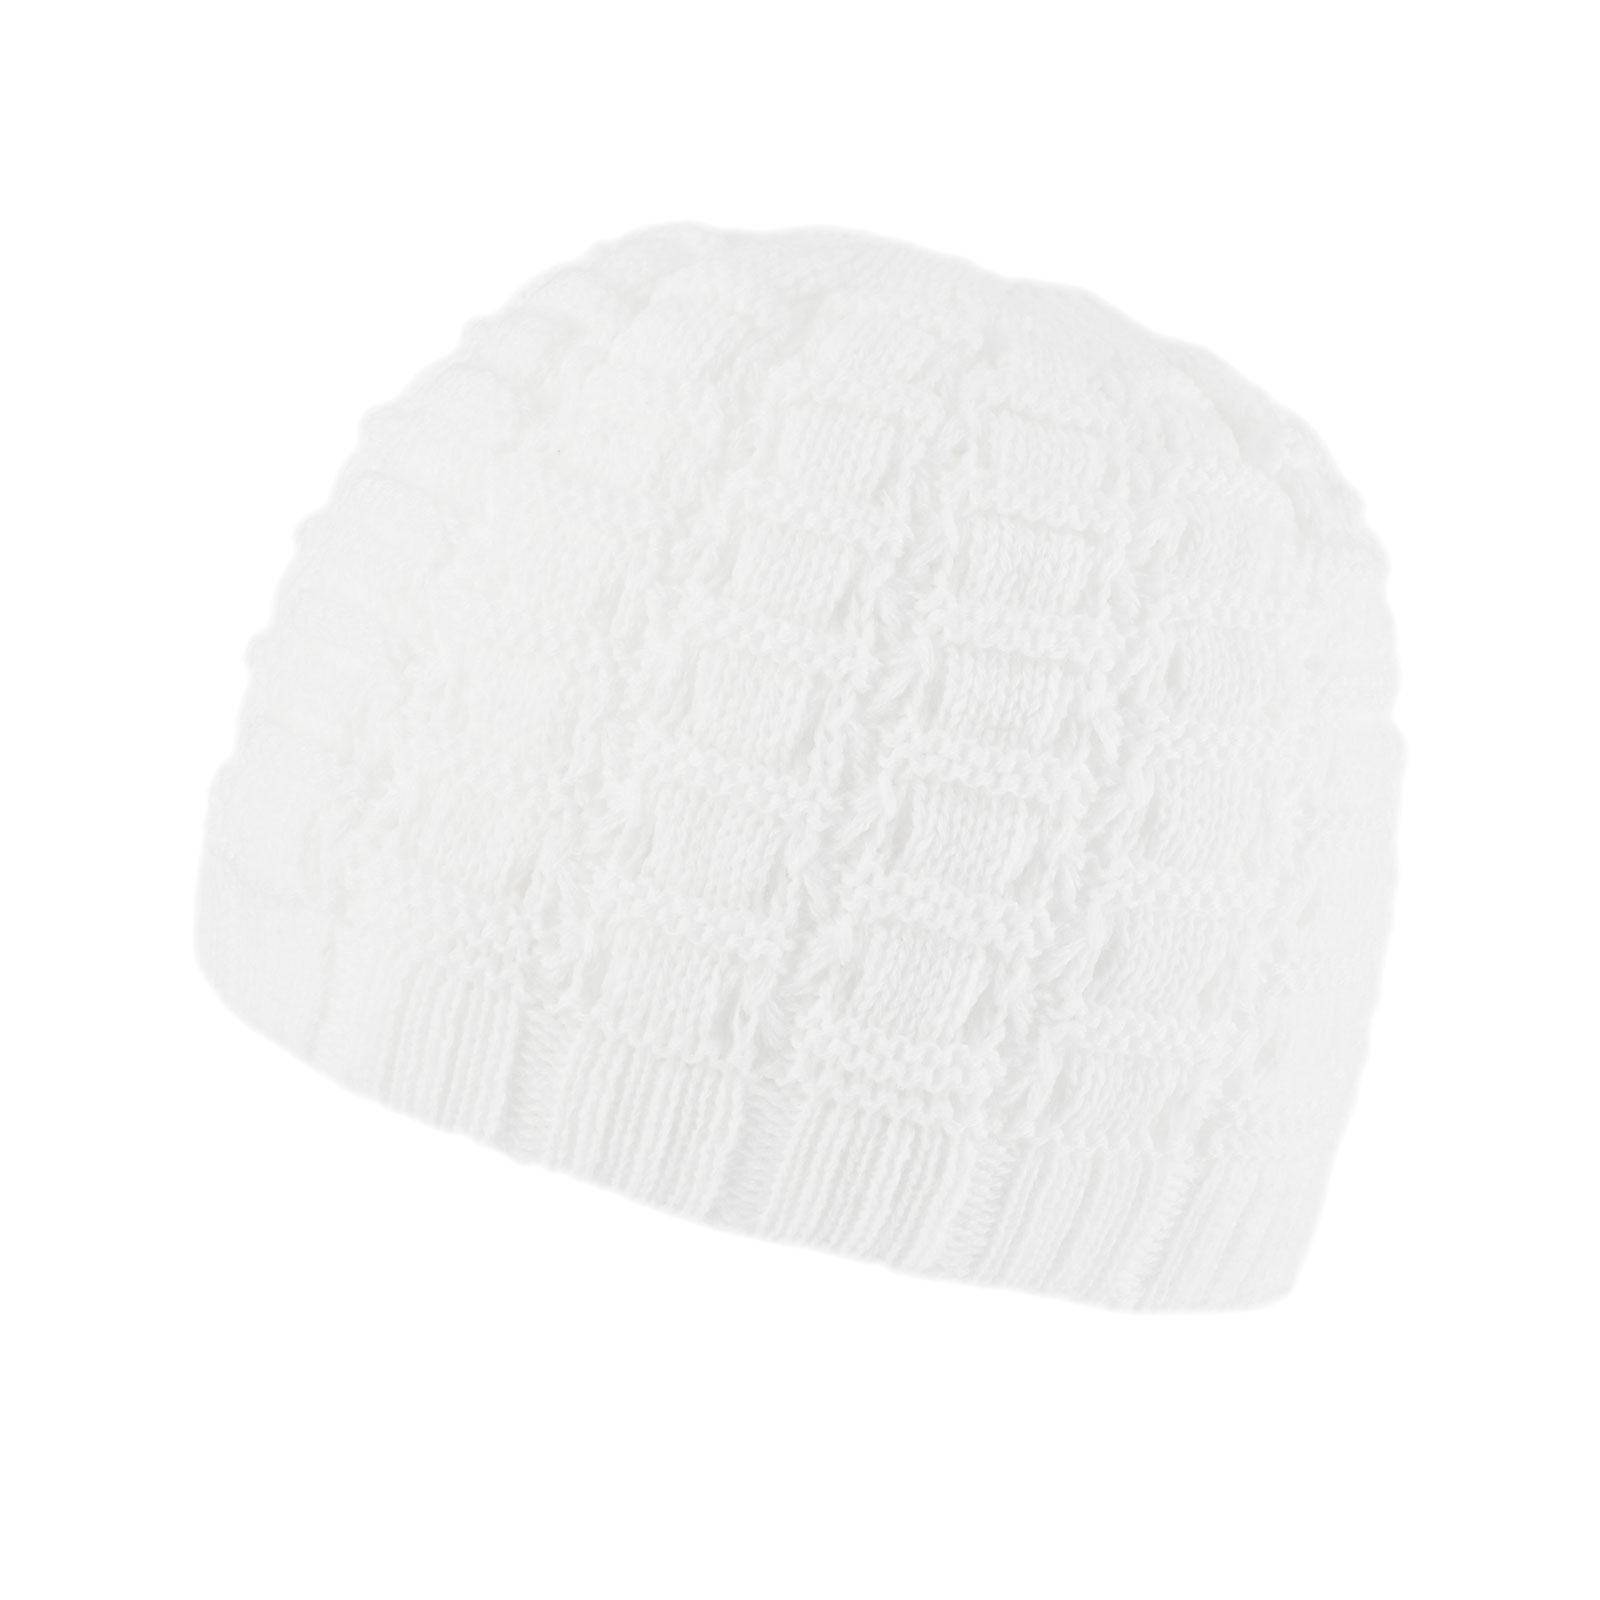 bonnet-femme-court-blanc-made-in-europe--CP-01200